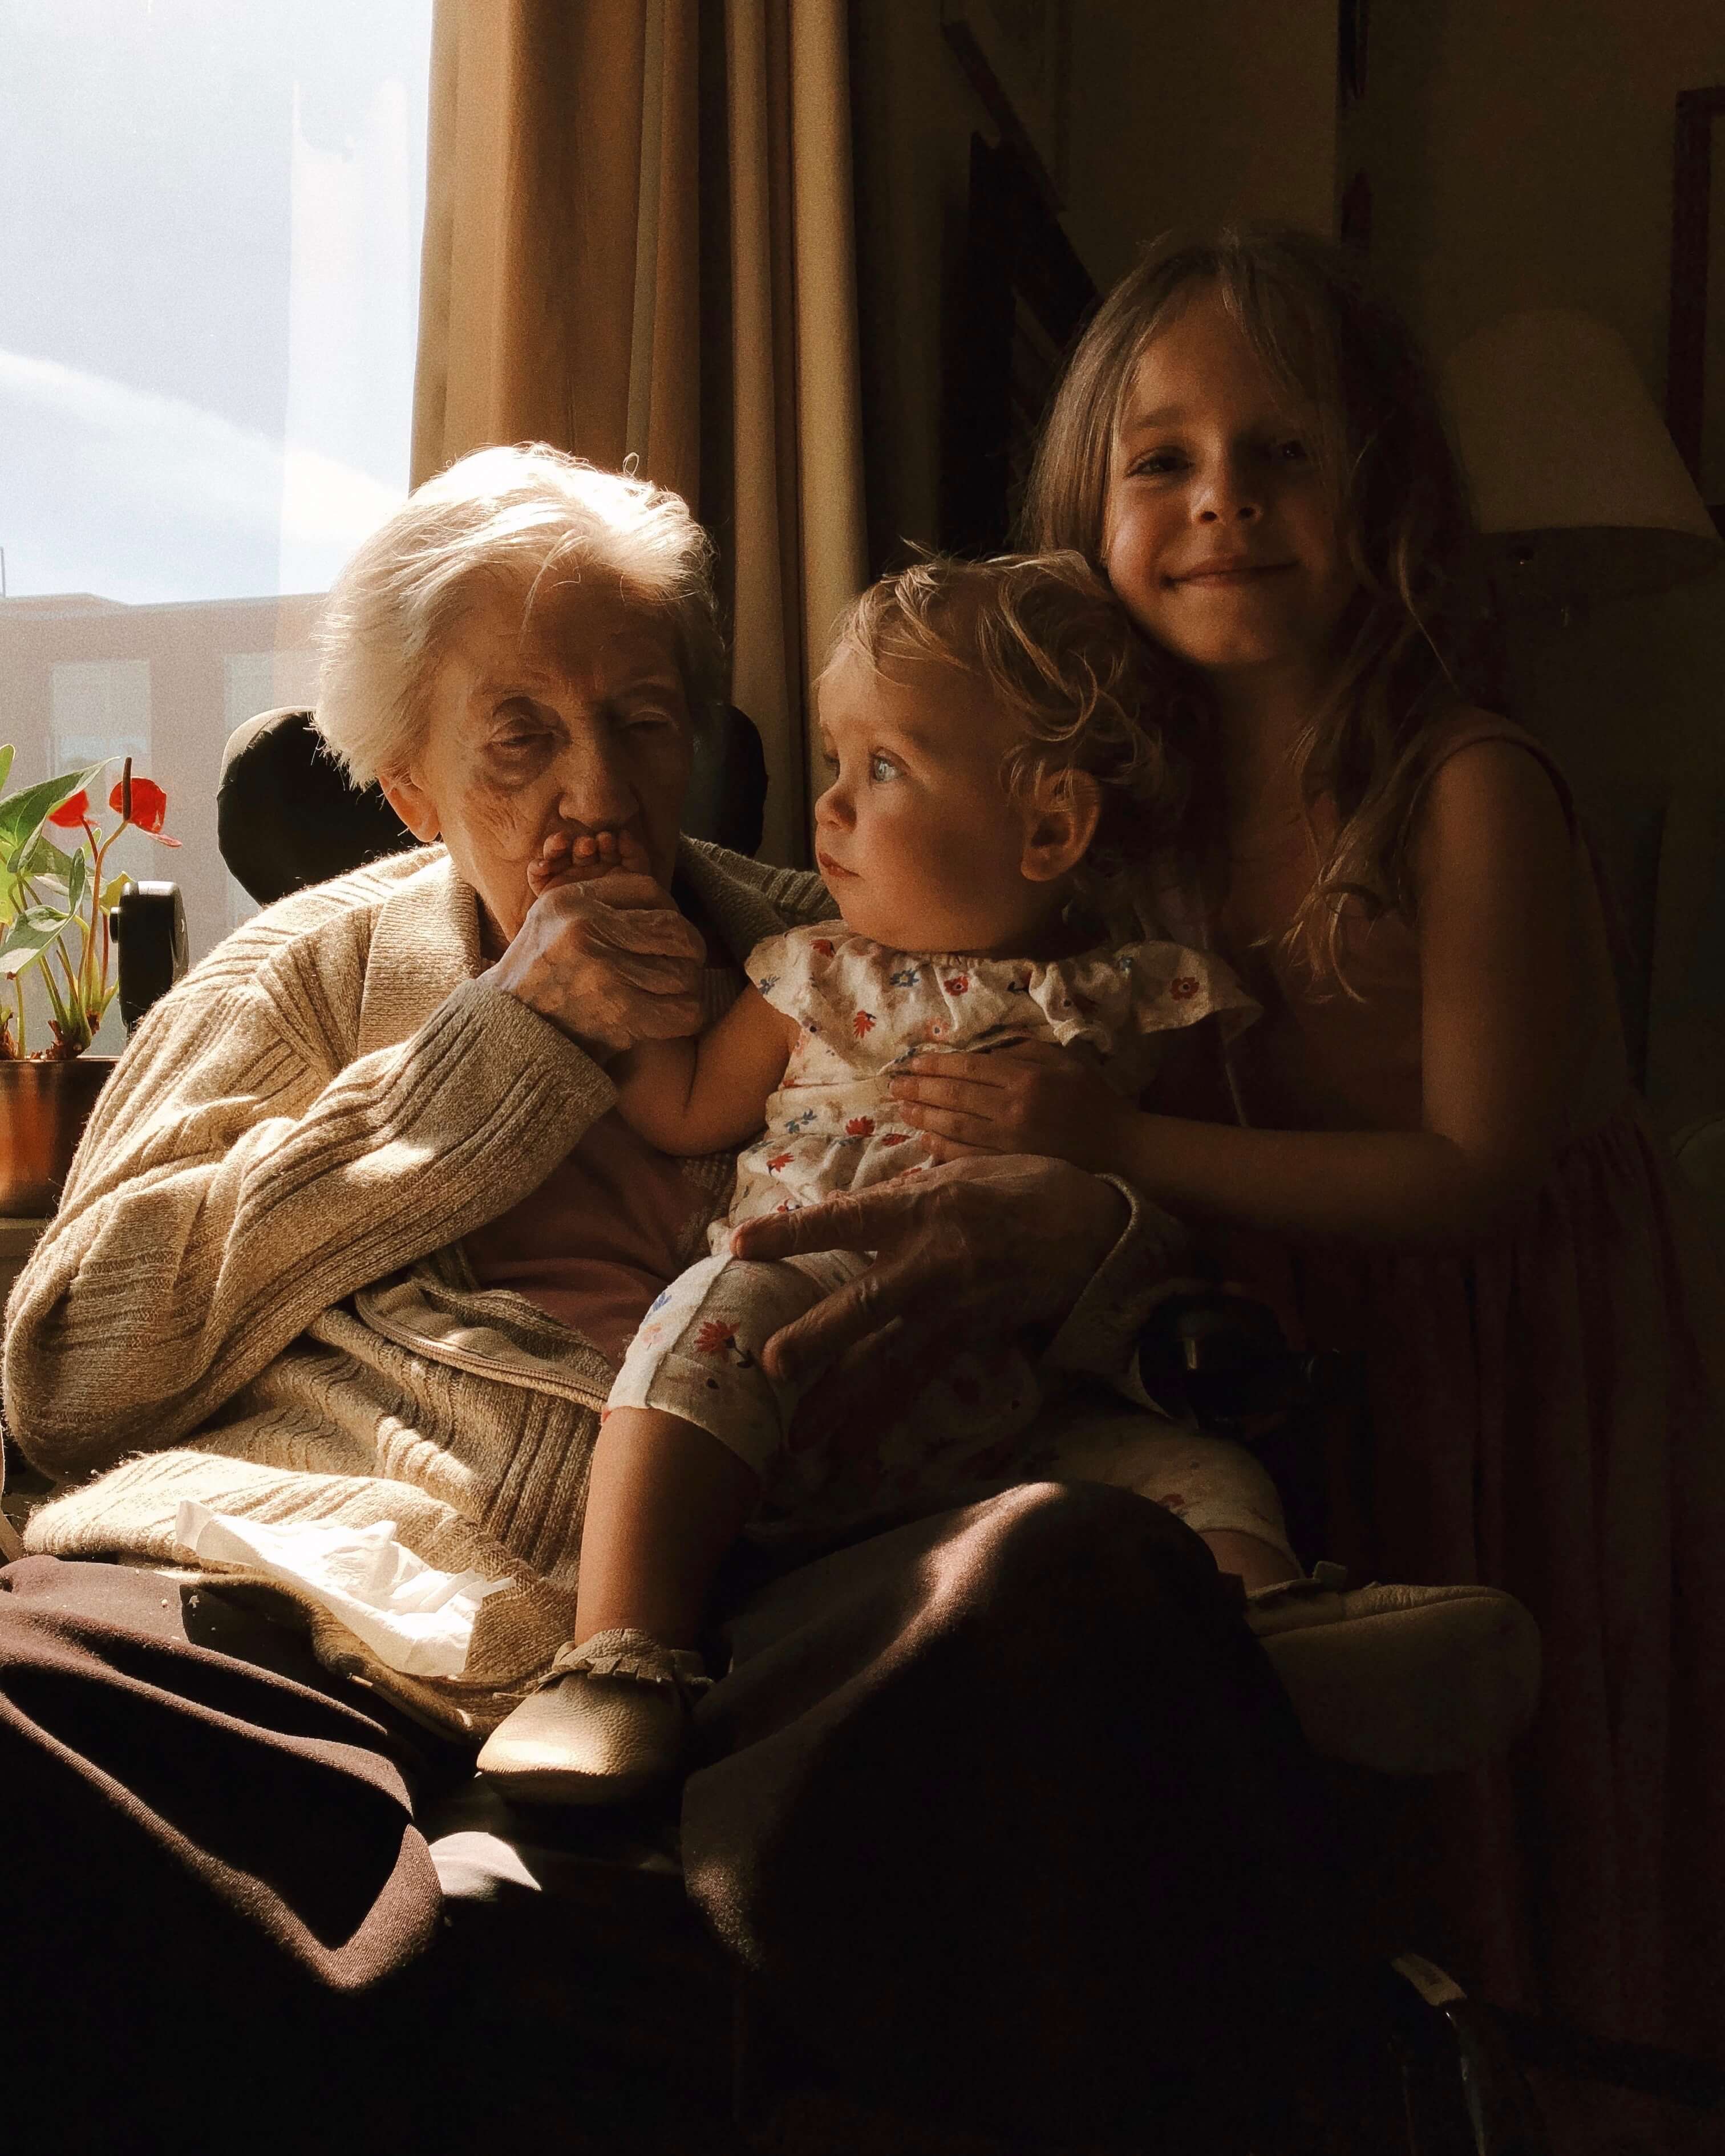 Grandmother with granddaughters by the window